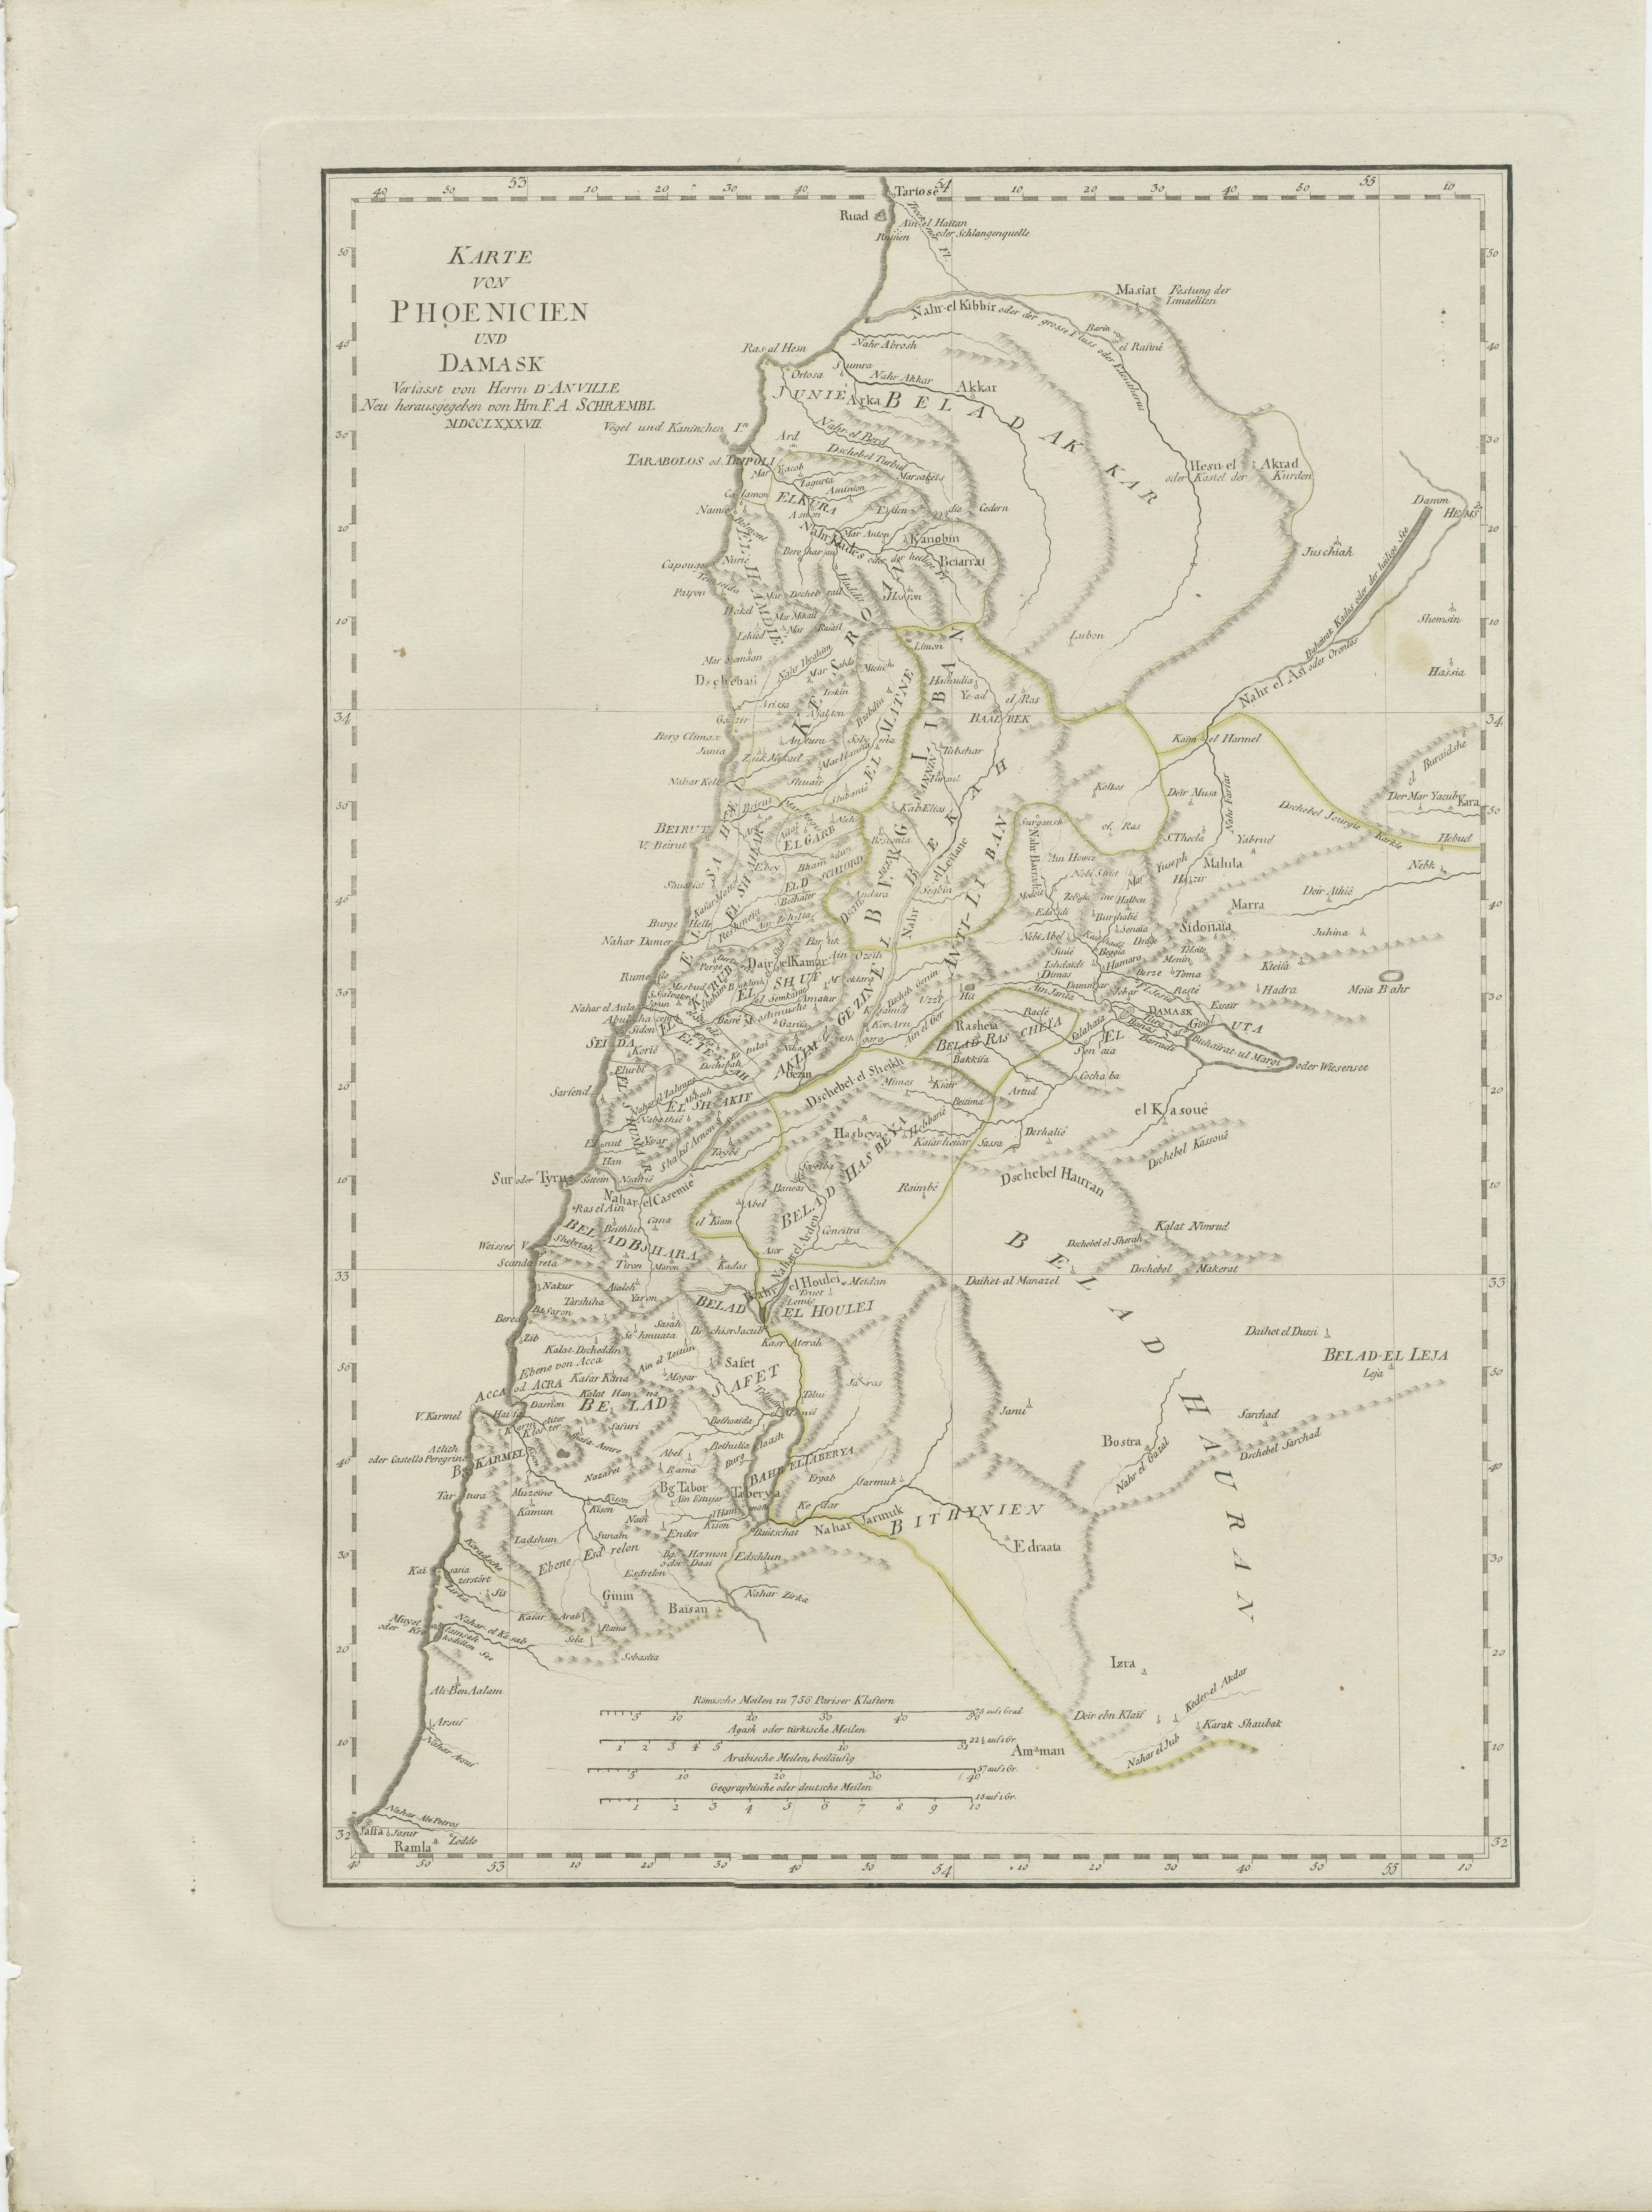 Antique map titled 'Karte von Phoenicien und Damask'. Original old map of contemporary Phoenicia and Damascus, with northern Palestine. Phoenicia was an ancient thalassocratic civilization originating in the Levant region of the eastern